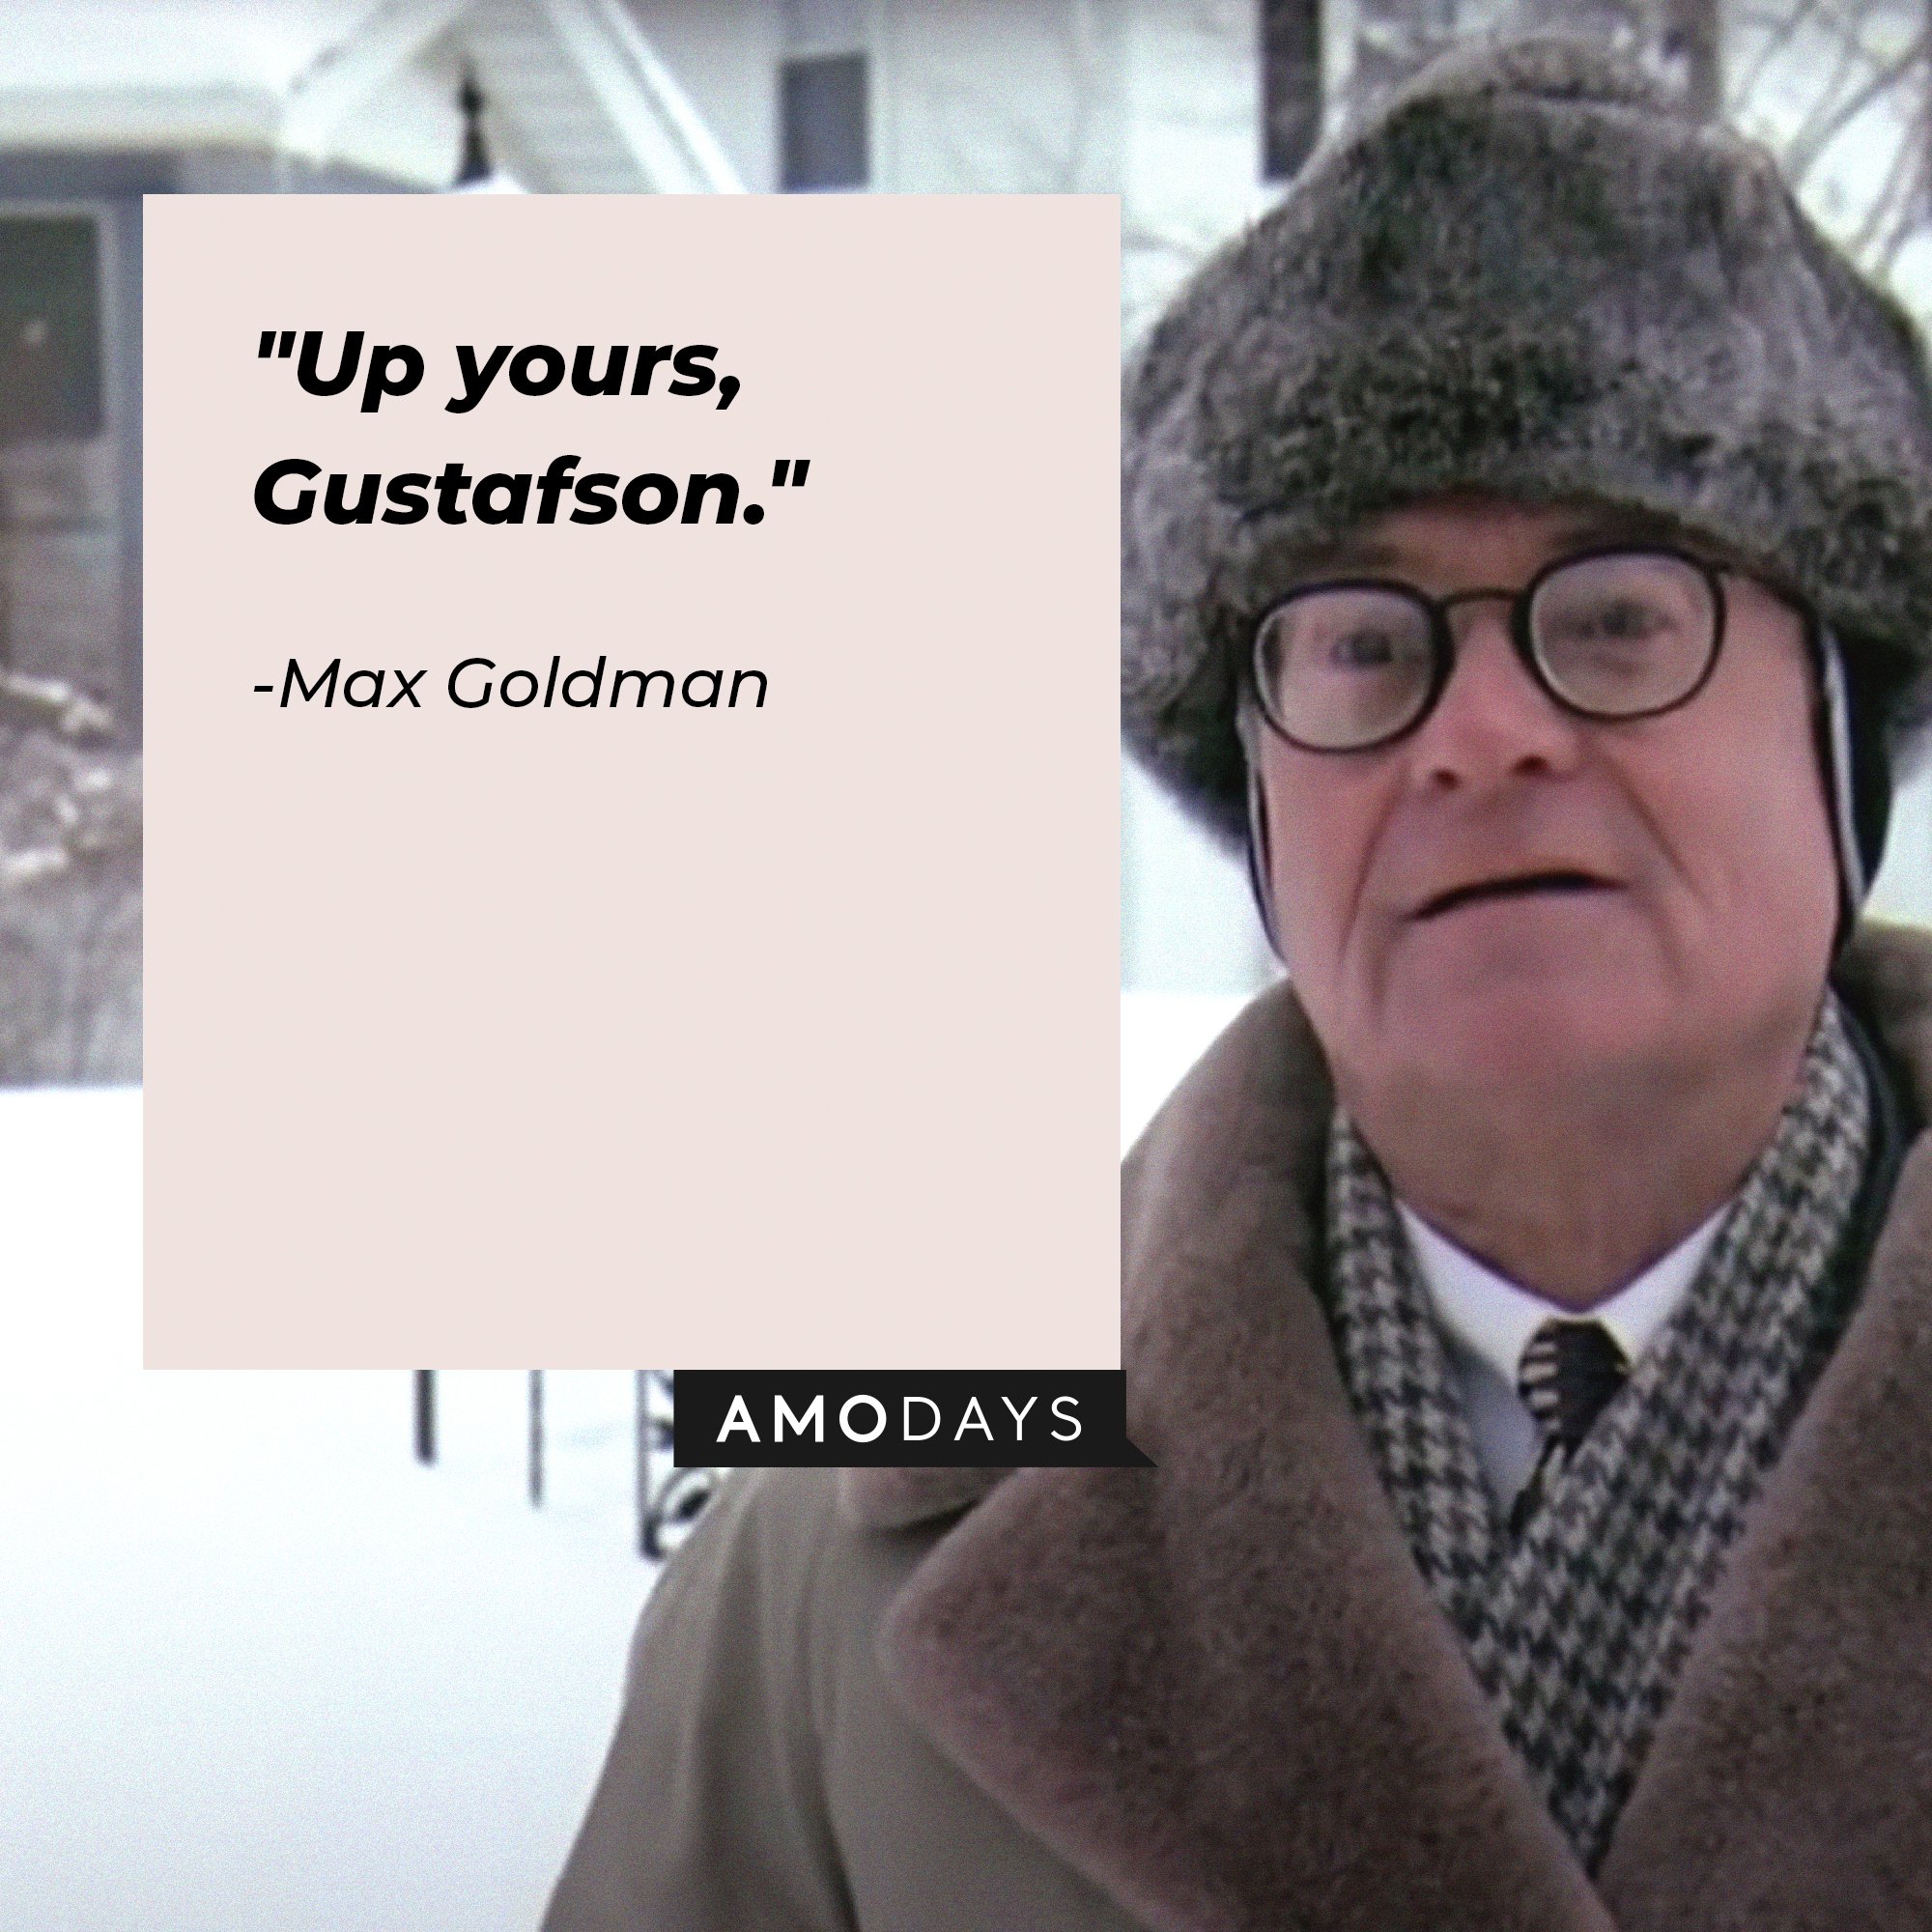 Max Goldman’s quote: "Up yours, Gustafson." | Image: AmoDays